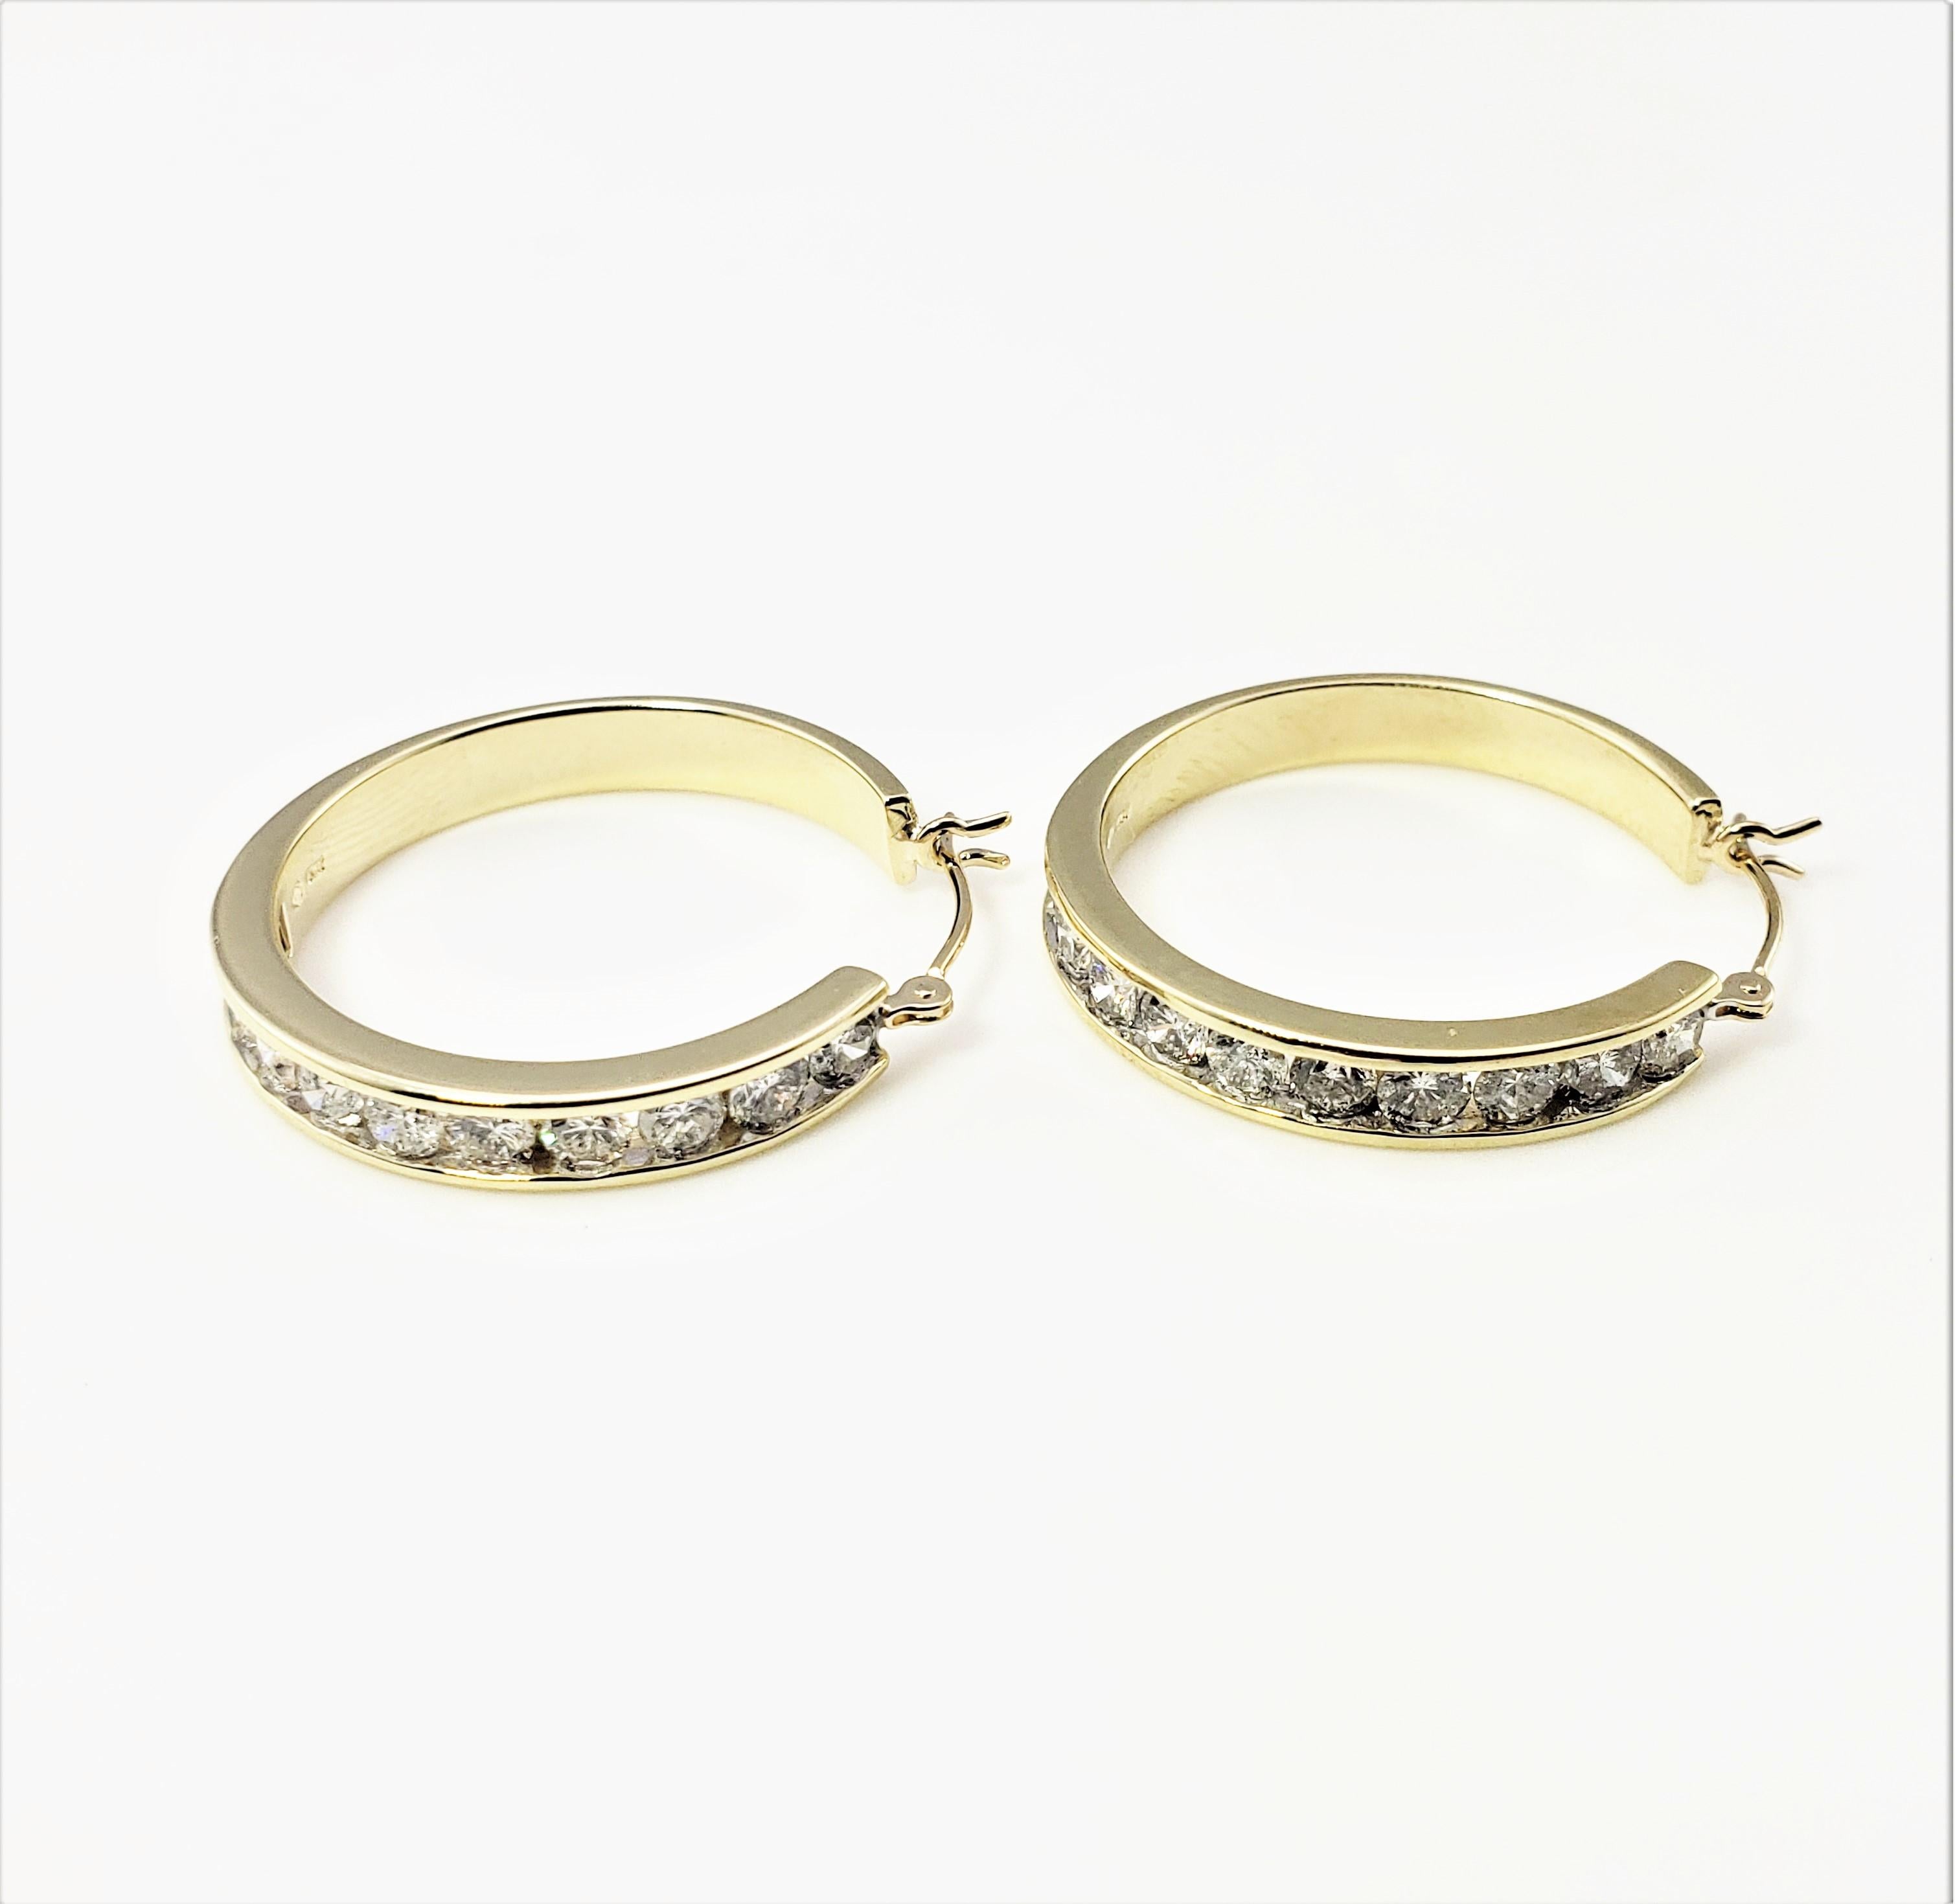 Vintage 14 Karat Yellow Gold Diamond Hoop Earrings-

These sparkling hoop earrings each feature ten round brilliant cut diamonds set in beautifully detailed 14K yellow gold. Width: 4 mm.

Approximate total diamond weight: 1.40 ct.

Diamond color: